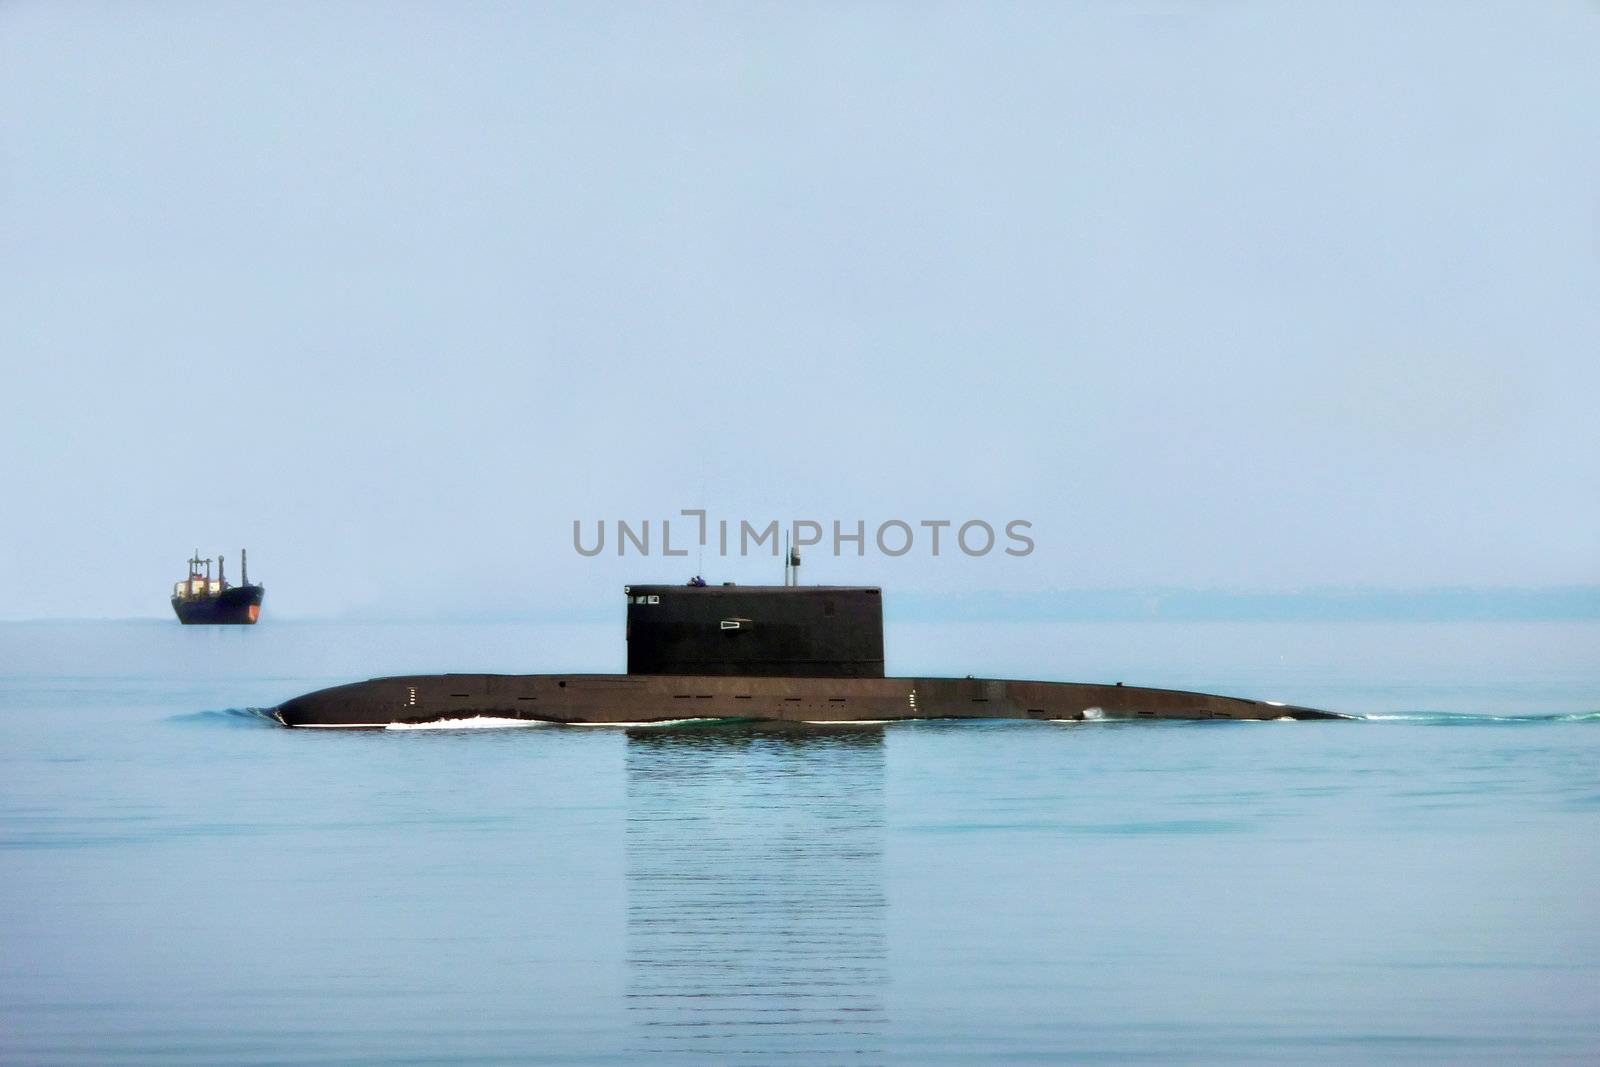 A submarine boat puts out to the high sea